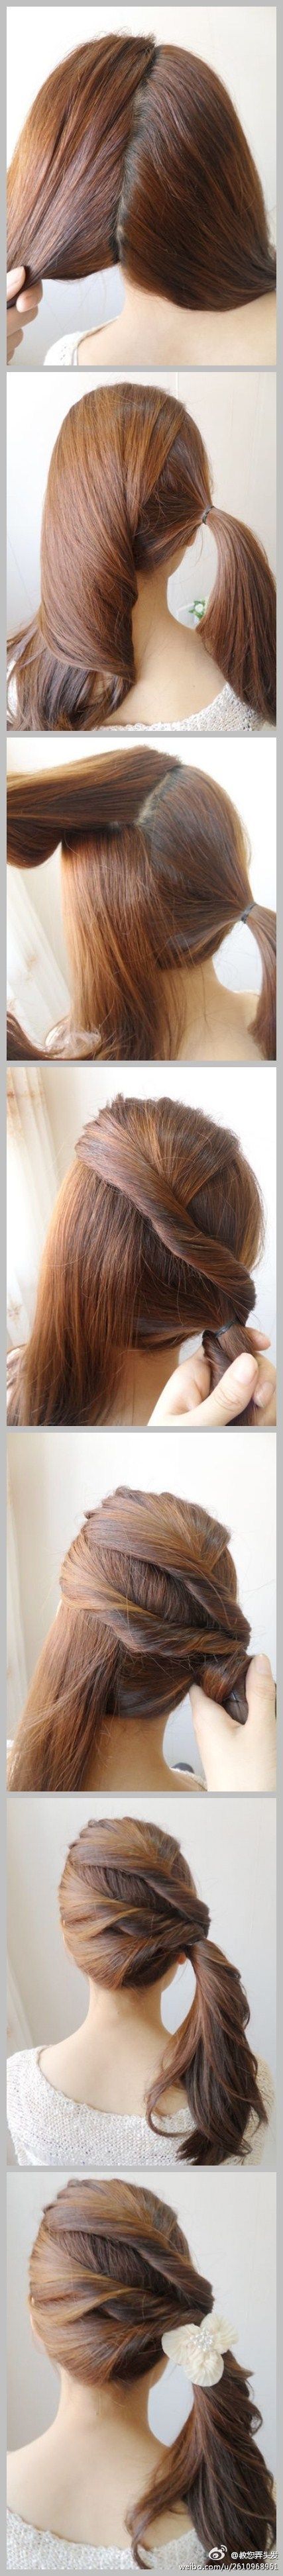 Step By Step Best Party Wear Hairstyles Tutorial Looks & Ideas with Pictures (2)